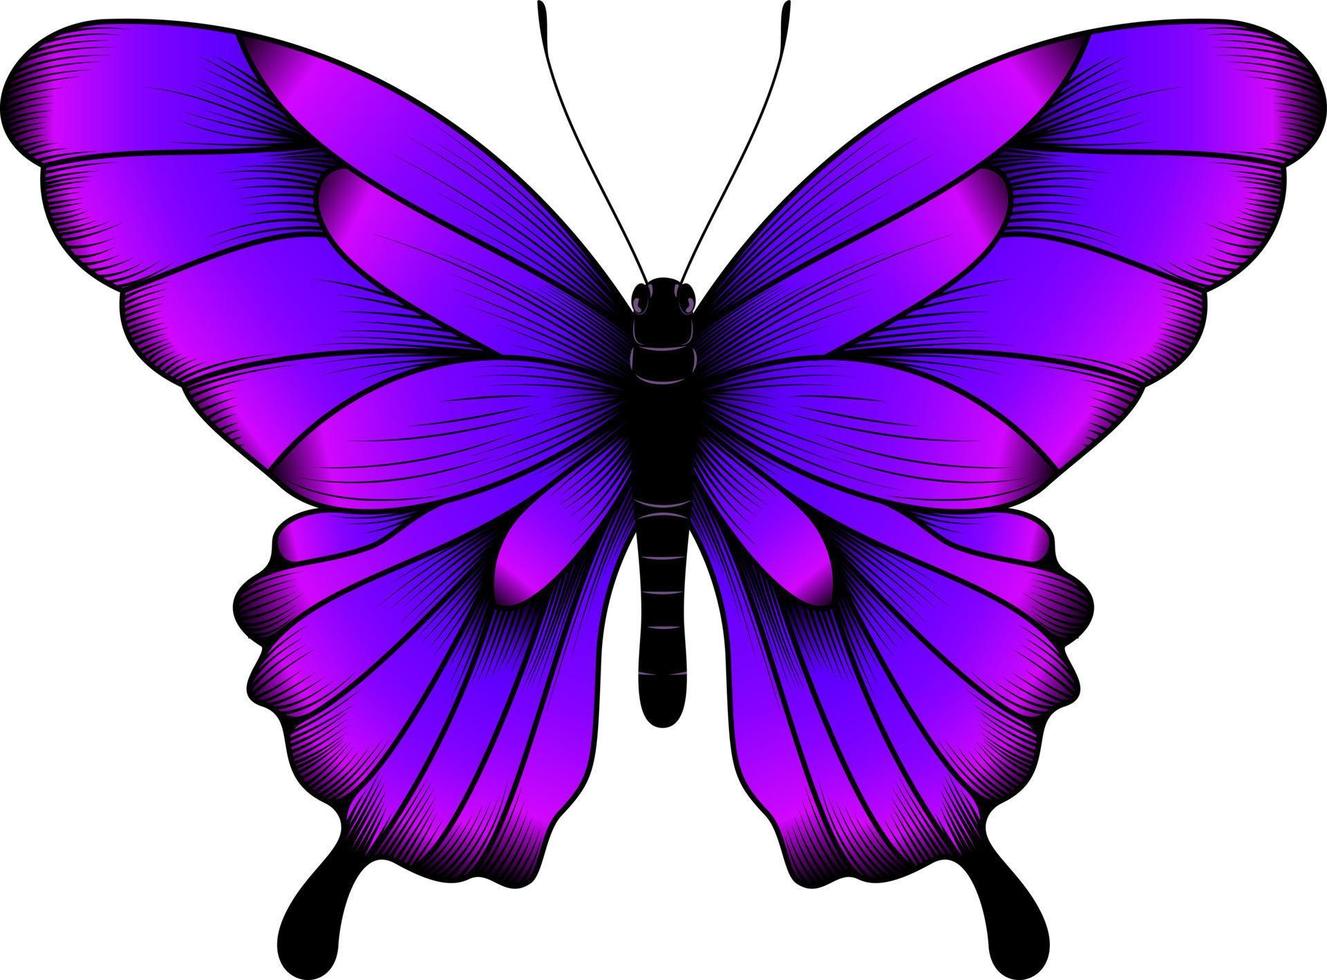 Tropical Purple Butterfly Illustration - Beautiful Butterfly Vector